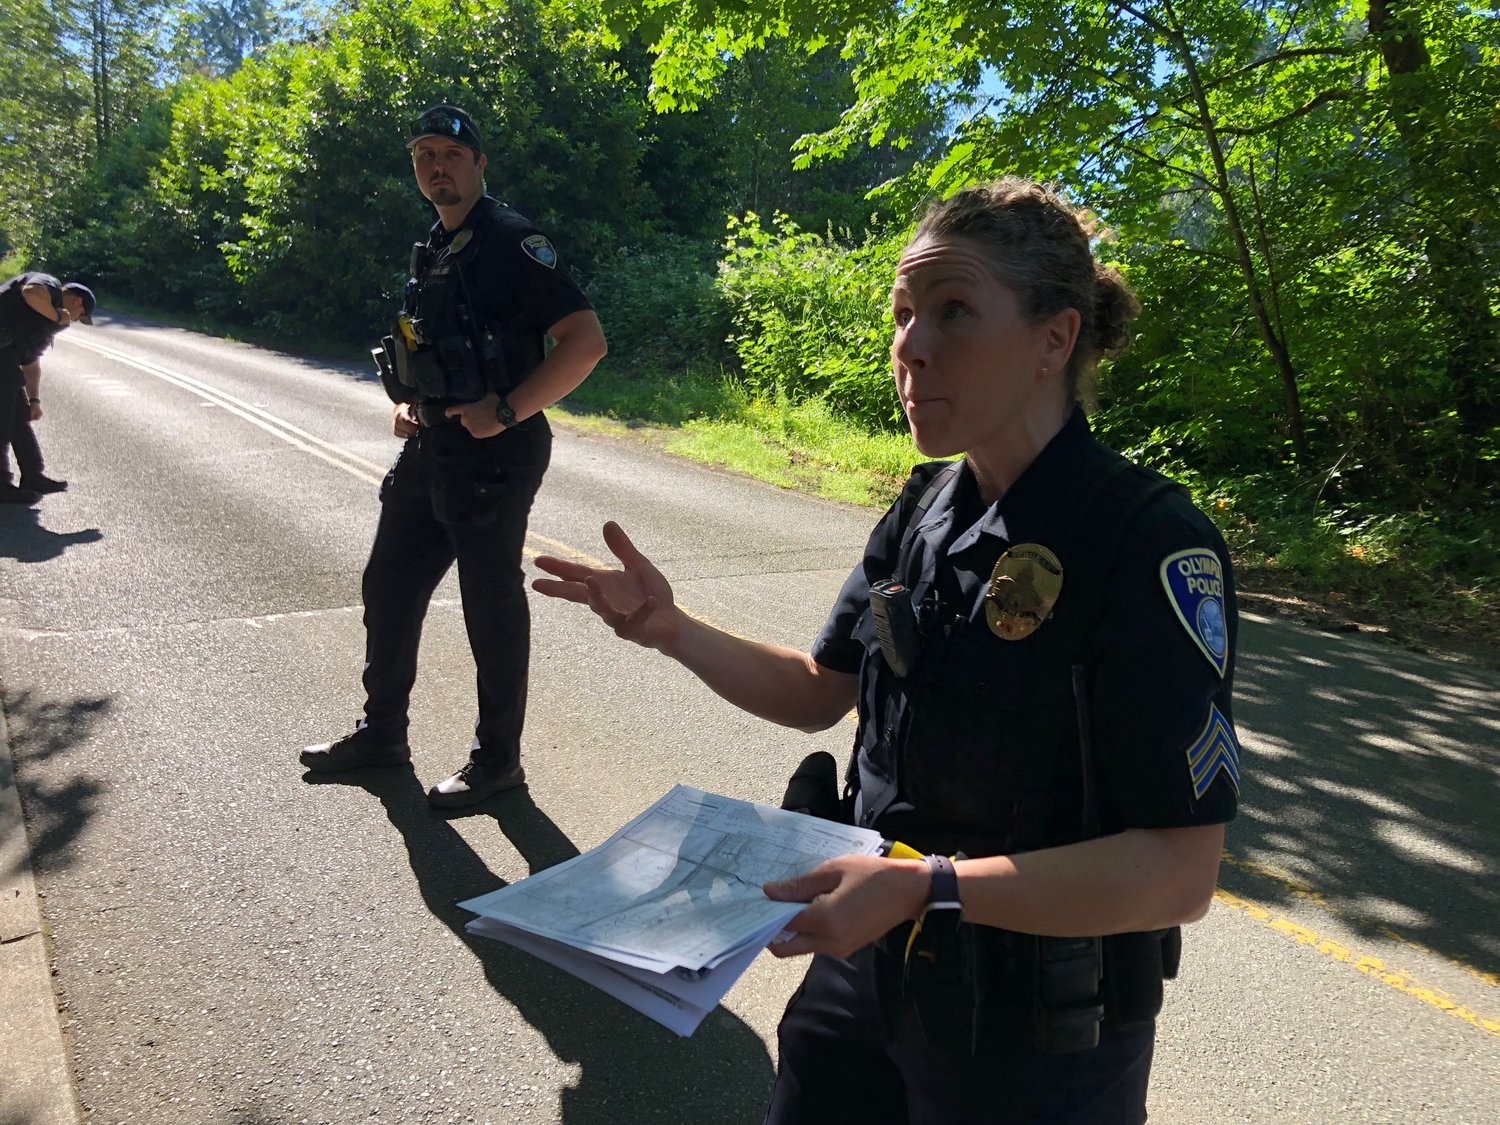 Sgt S. Parker explains  about the city of Olympia's jurisdiction over the logging and the safety barriers near the logging operation on June 27, 2022.